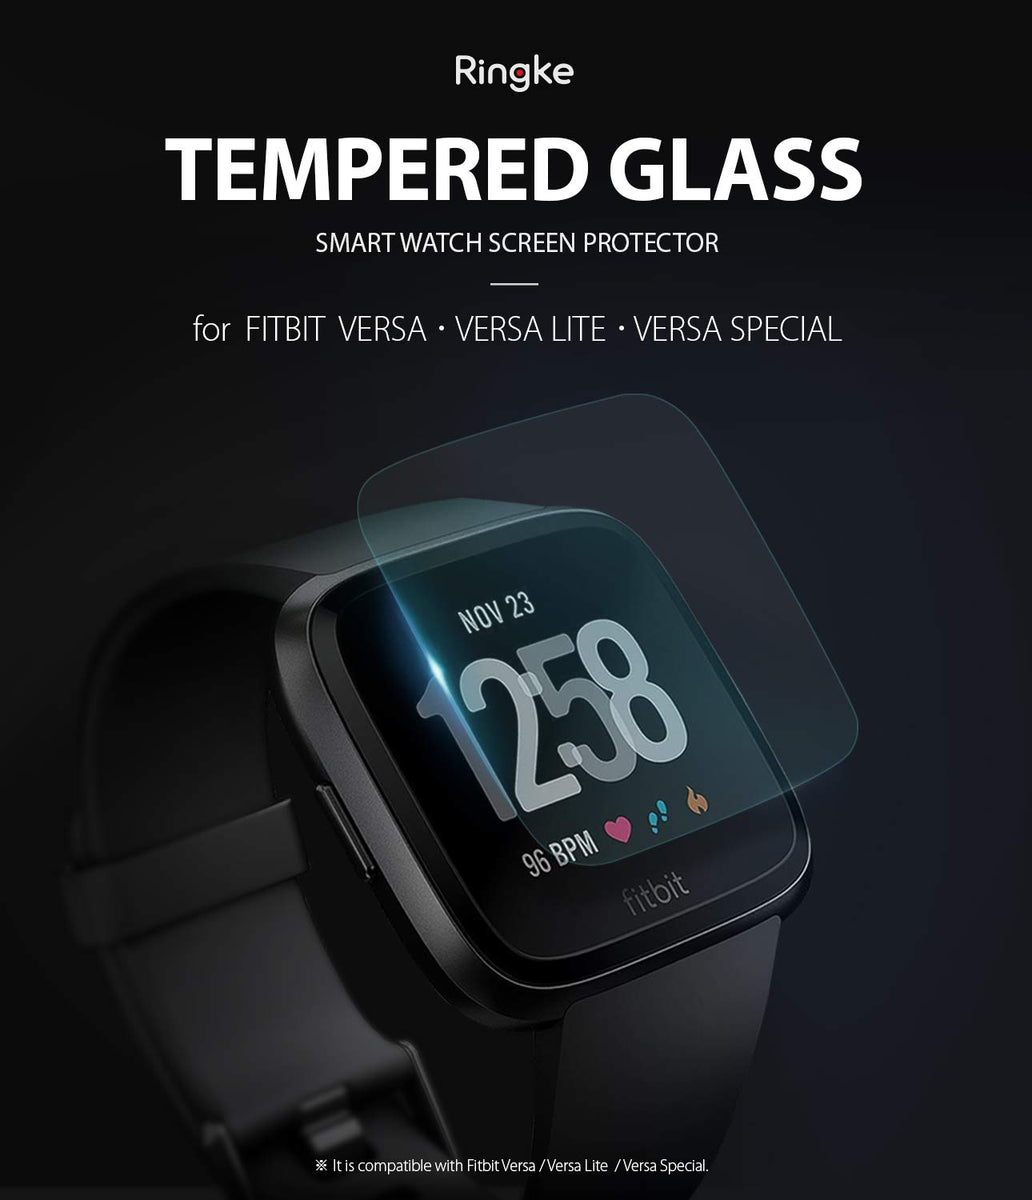 is the fitbit versa 2 compatible with samsung galaxy s7